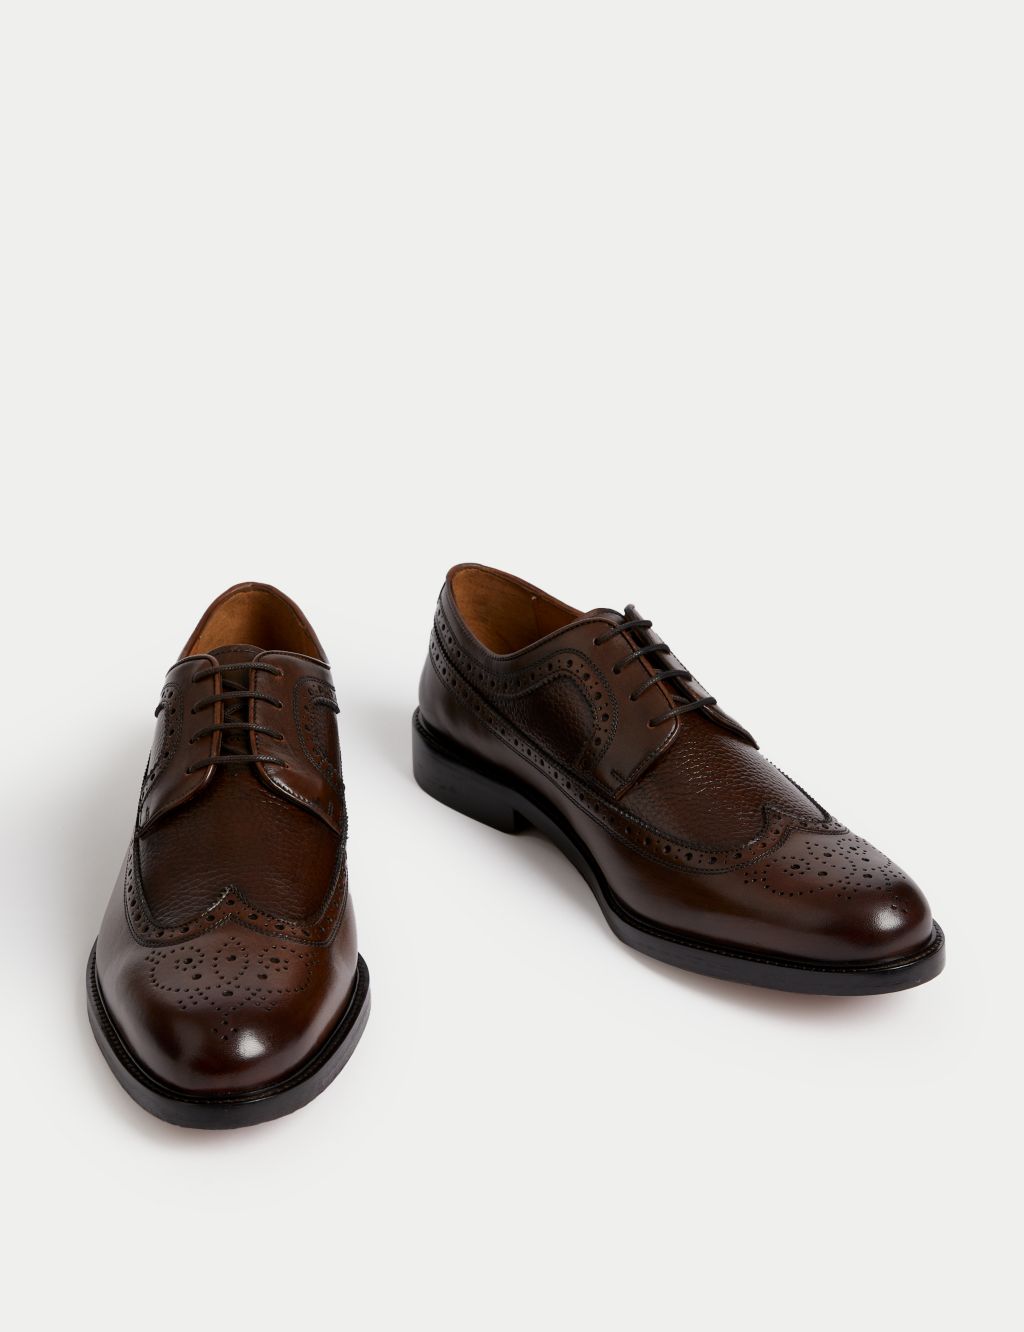 Leather Brogues image 2